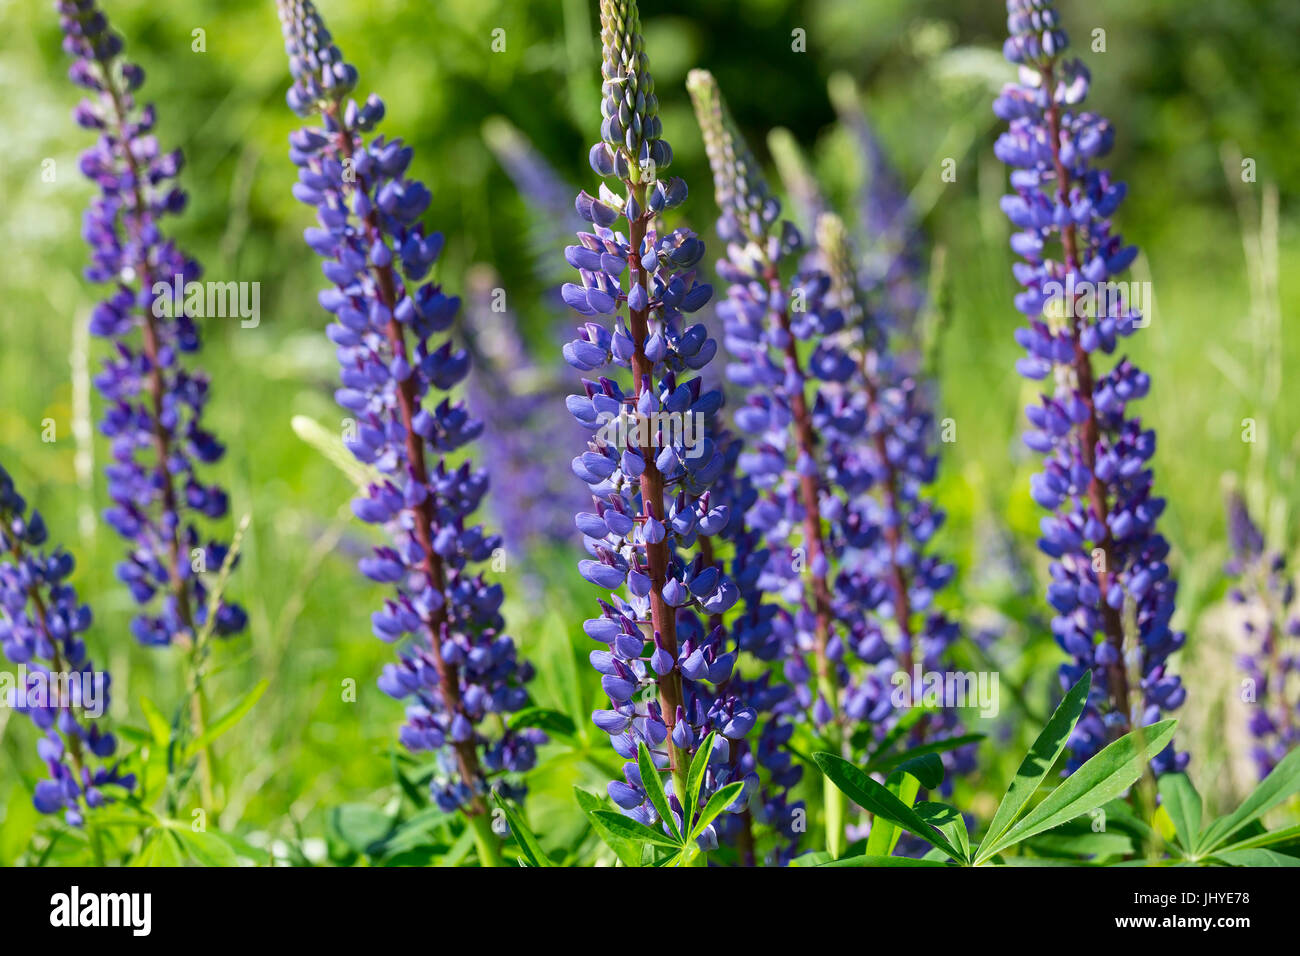 Blossoming lupins (Lupinus) - Blooming Lupins (Lupinus), Bluehende Lupinen (Lupinus) - Blooming Lupins (Lupinus) Stock Photo